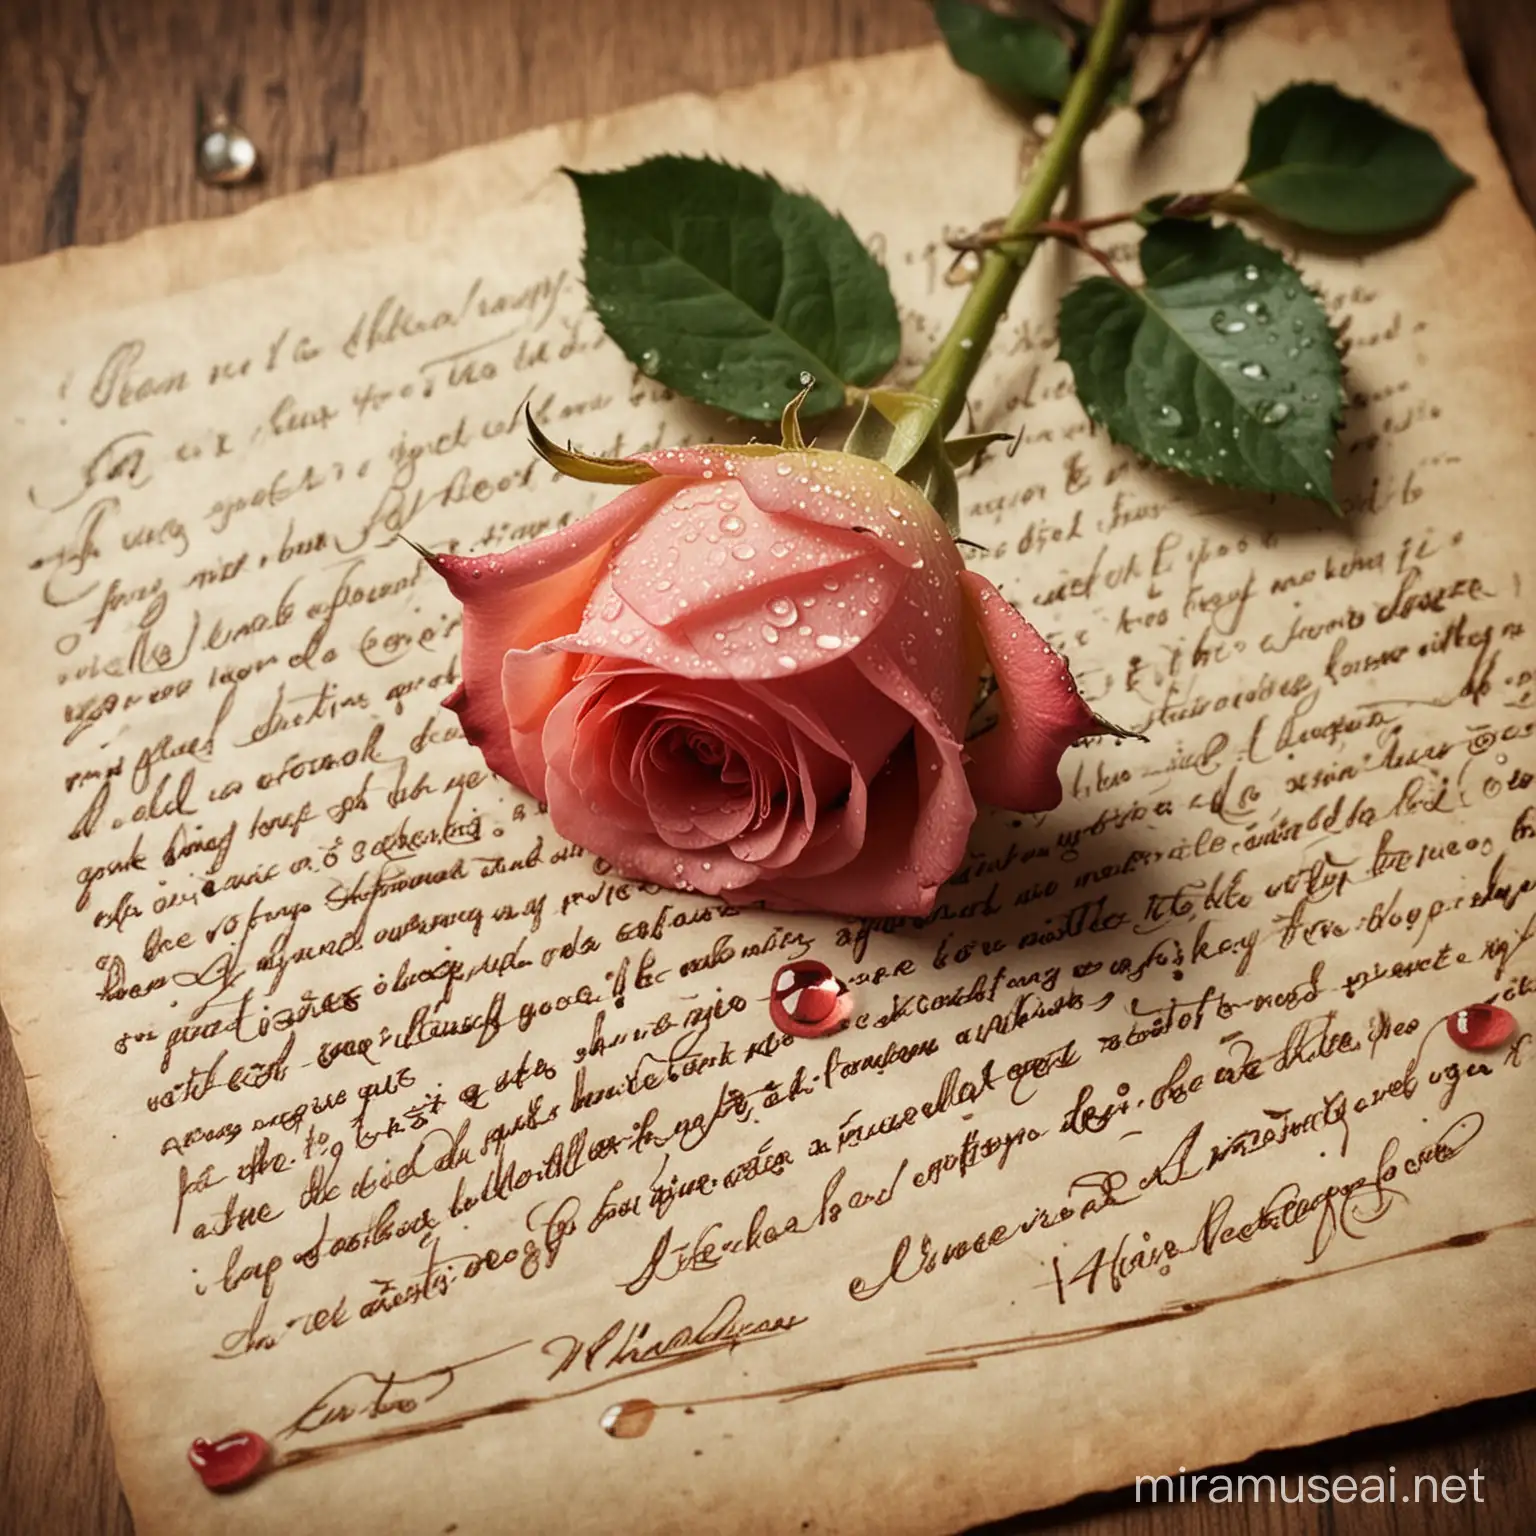 Old days letter, written by a writer to her beloved with a rose and water drops on the letter.